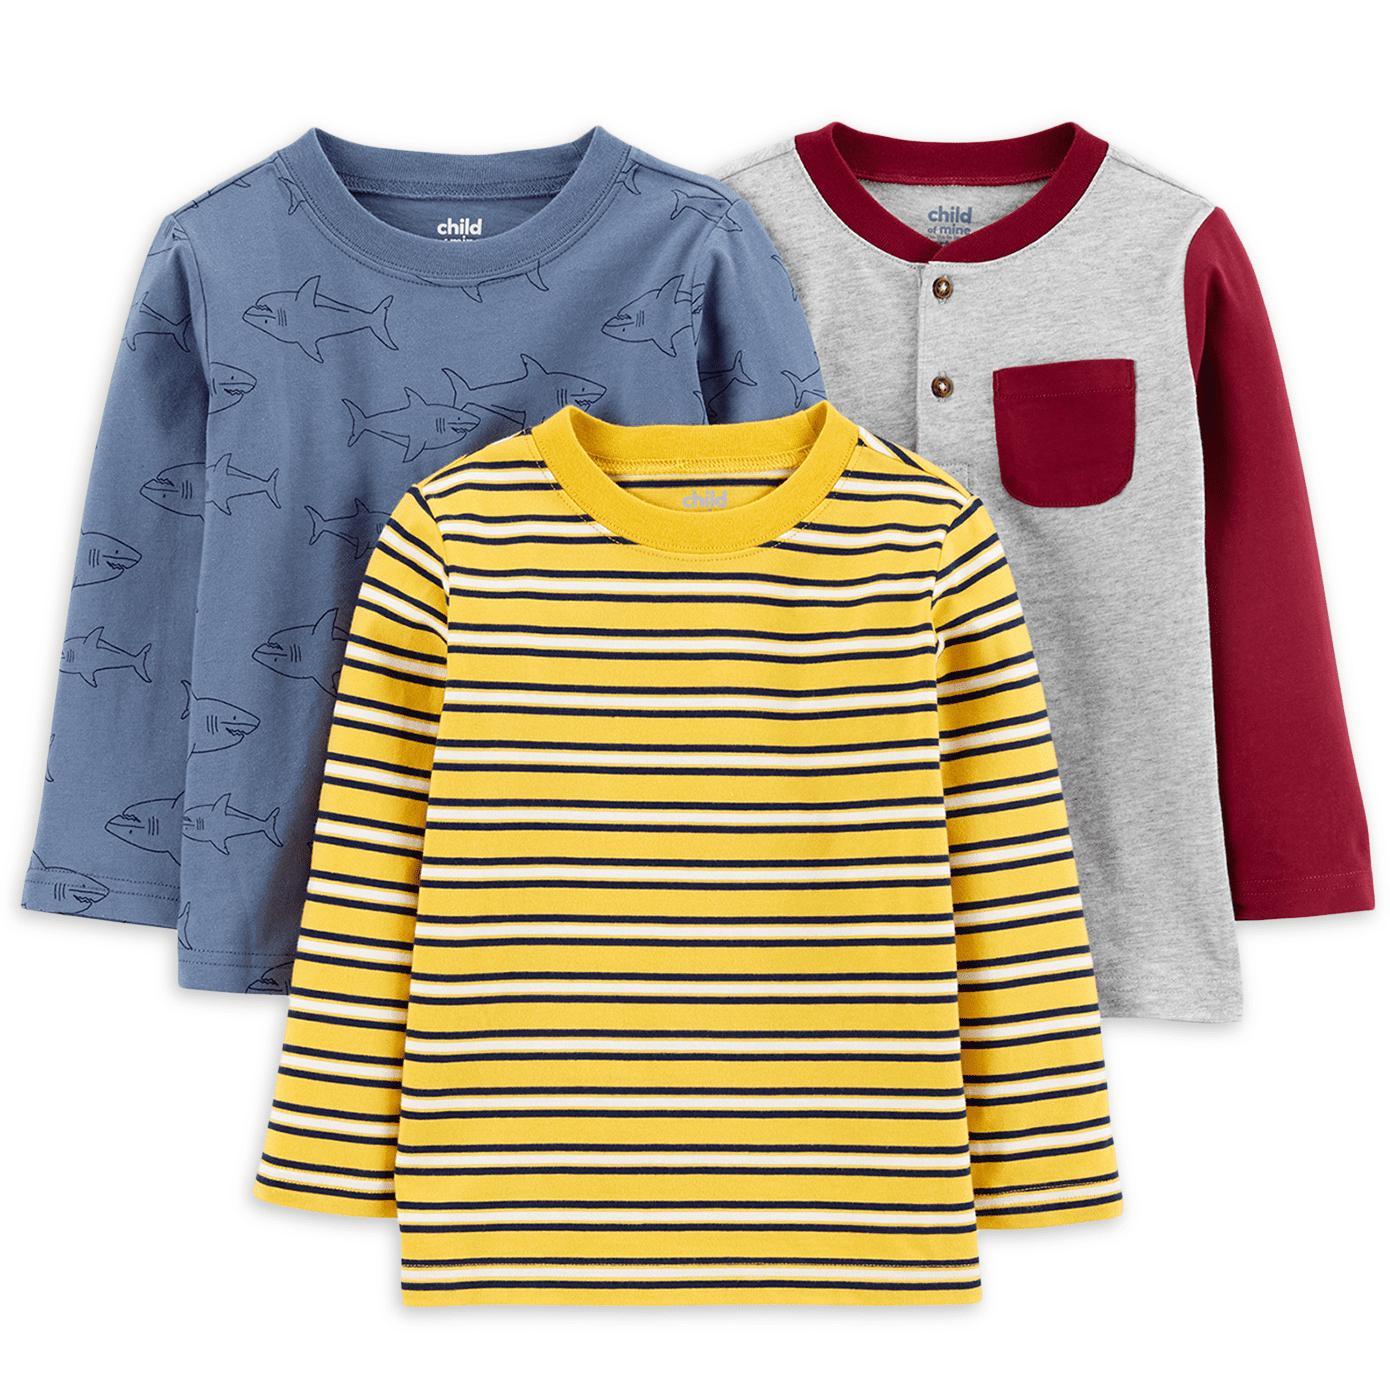 Carter's Child of Baby and Boy Long-Sleeve T-Shirt 3-Pack, Sizes 12M-5T" - Walmart.com